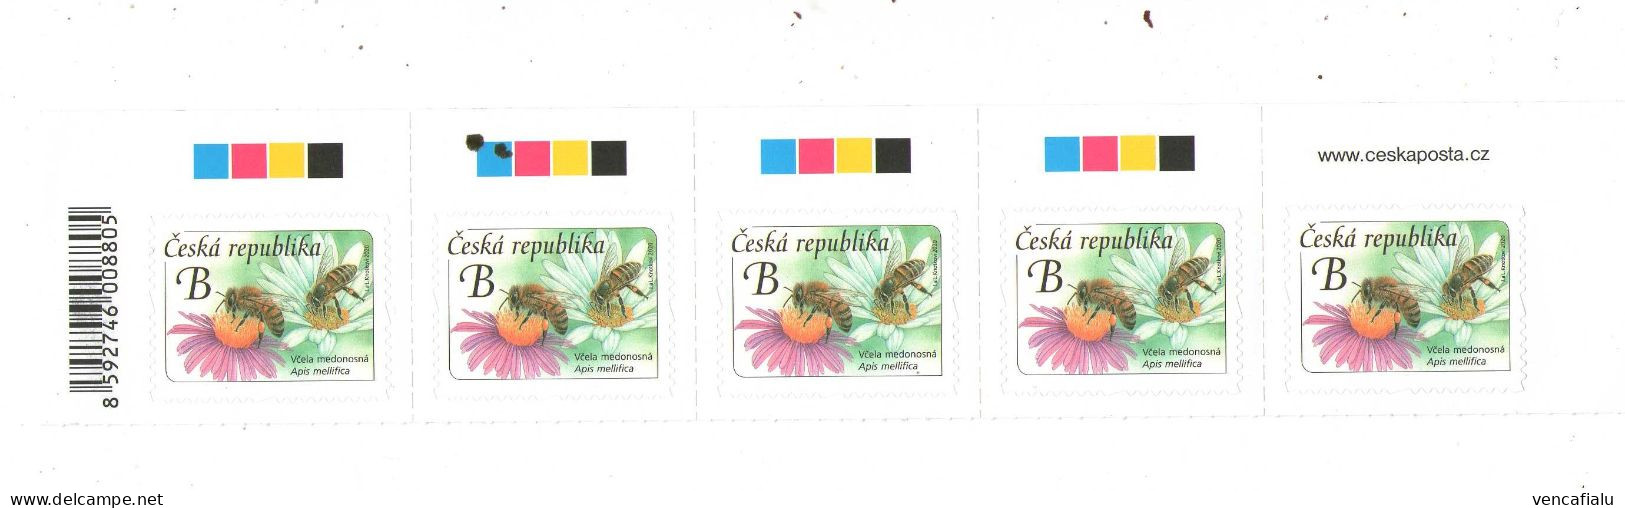 Czech Republic 2020 - Self Adhesive Stamp, Bottom Edge From MS, Barcode,color Test, Www, MNH - Honeybees